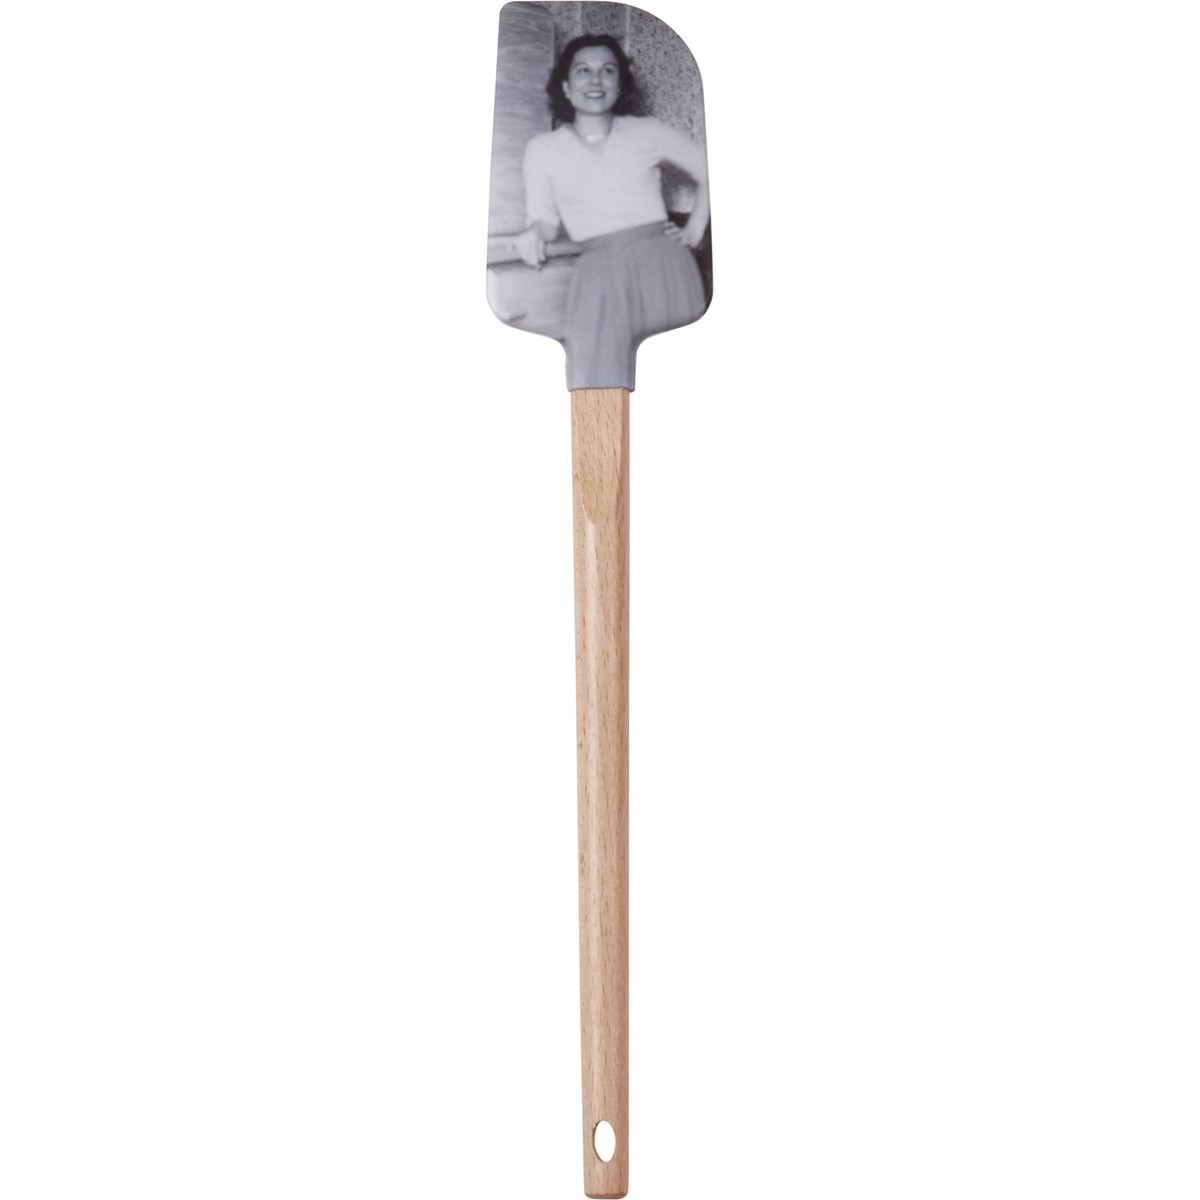 Spatula - Cupcakes Are Muffins That Believed - 2.50" x 13" x 0.50" - Silicone, Wood